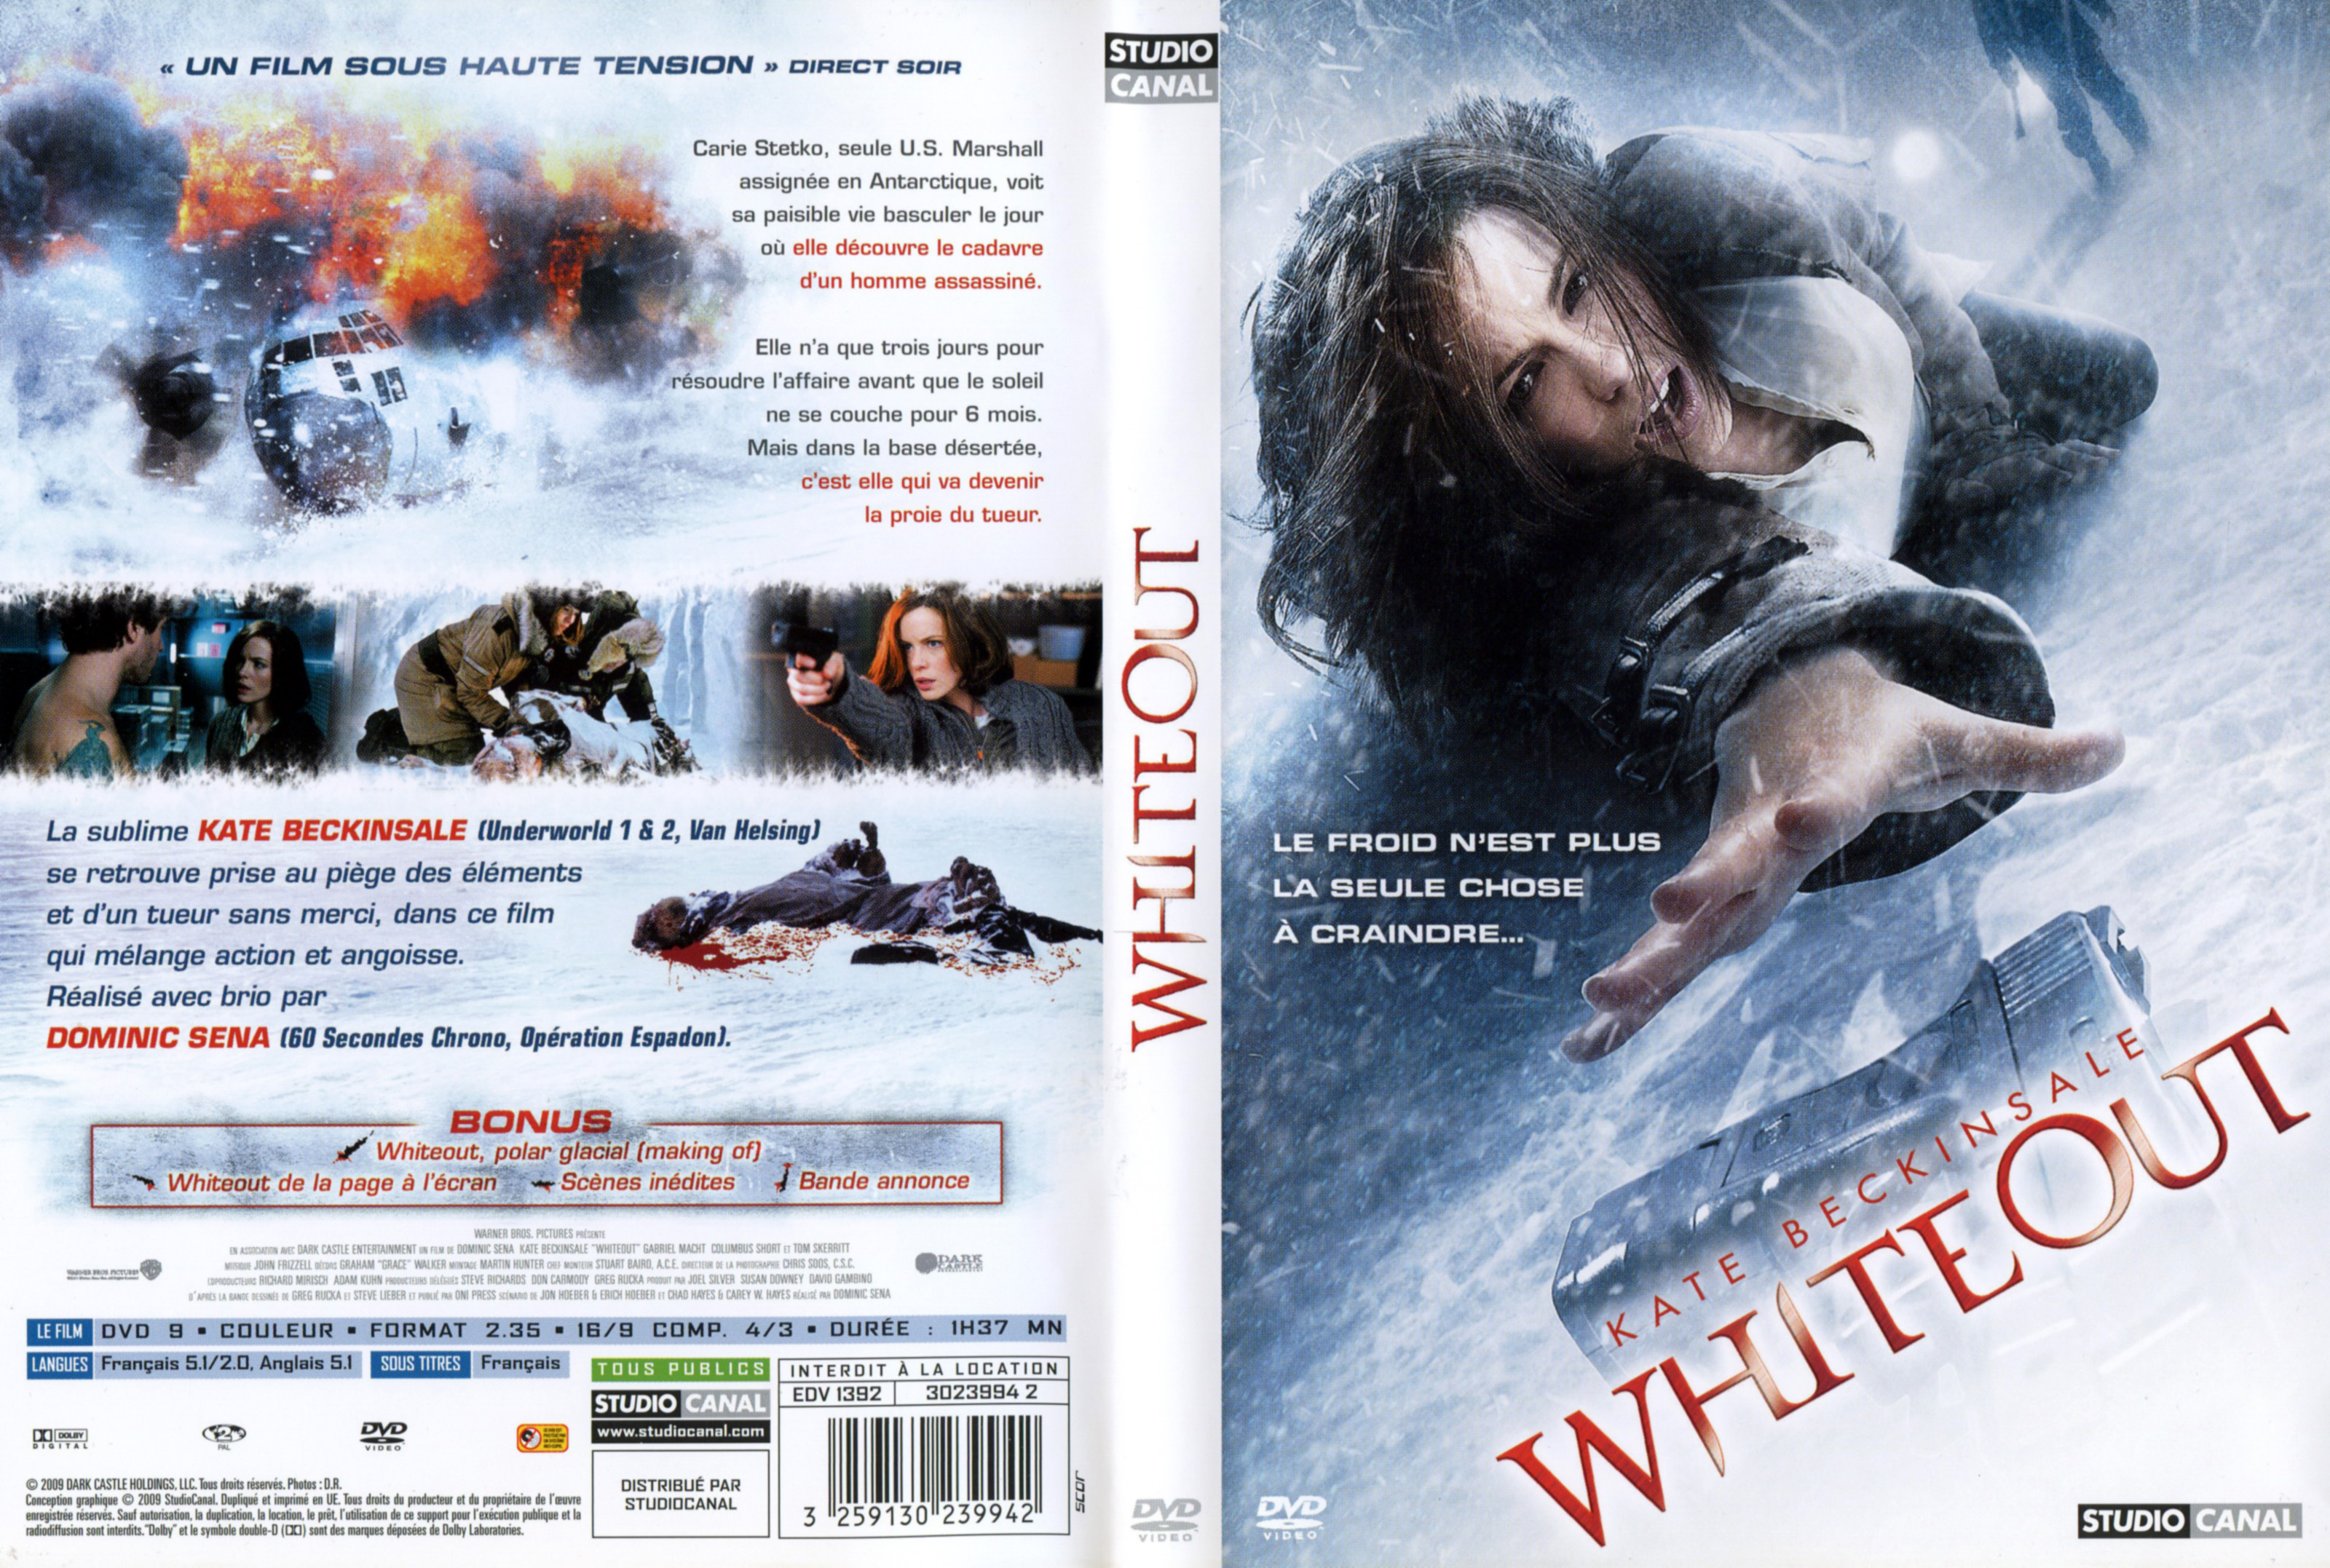 Jaquette DVD Whiteout